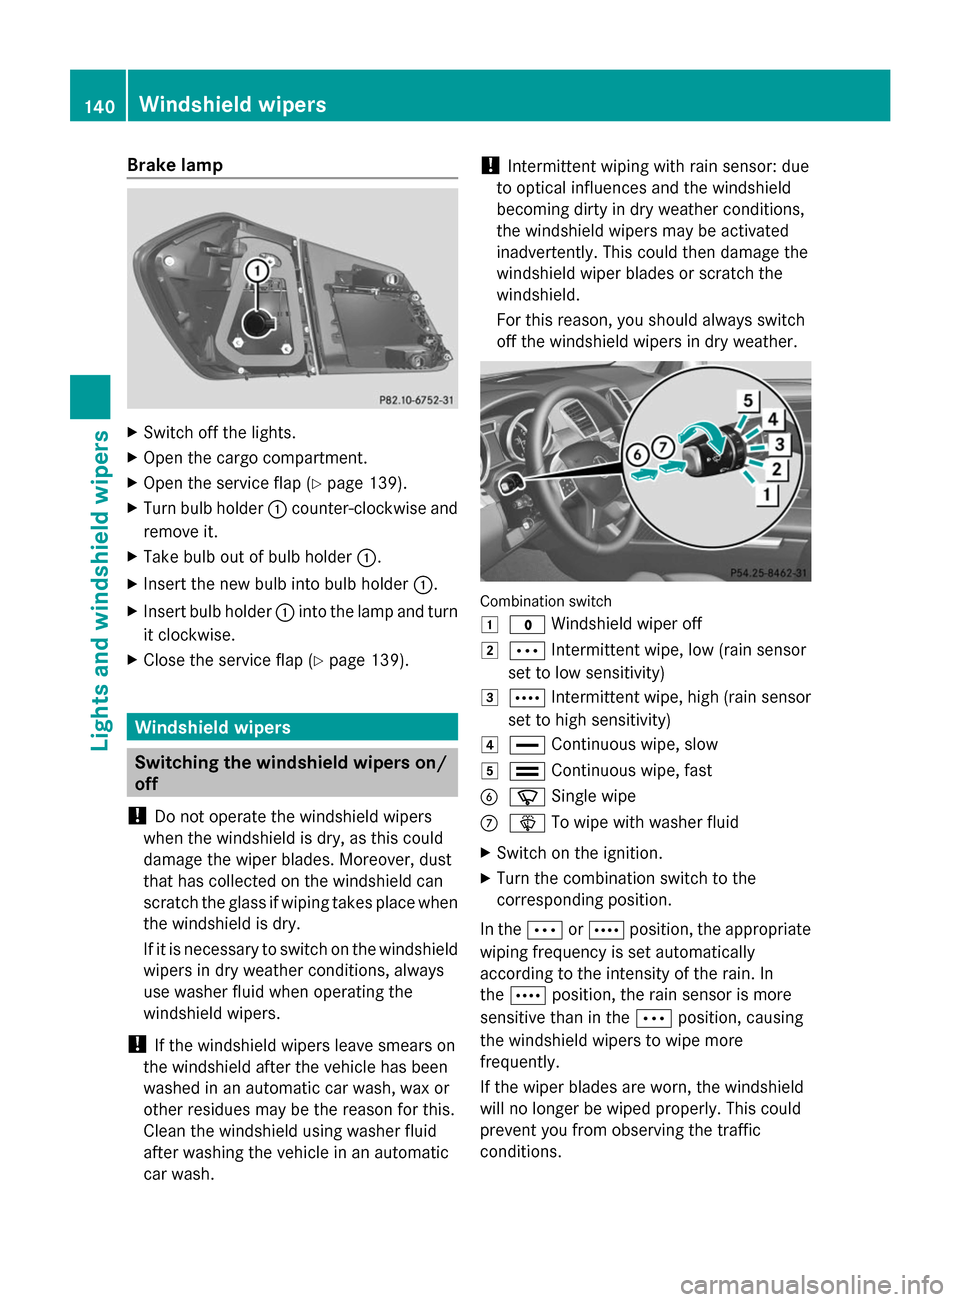 MERCEDES-BENZ GL-Class 2014 X166 Owners Manual Brake lamp
X
Switch off the lights.
X Open the cargo compartment.
X Open the service flap (Y page 139).
X Turn bulb holder :counter-clockwise and
remove it.
X Take bulb out of bulb holder :.
X Insert 